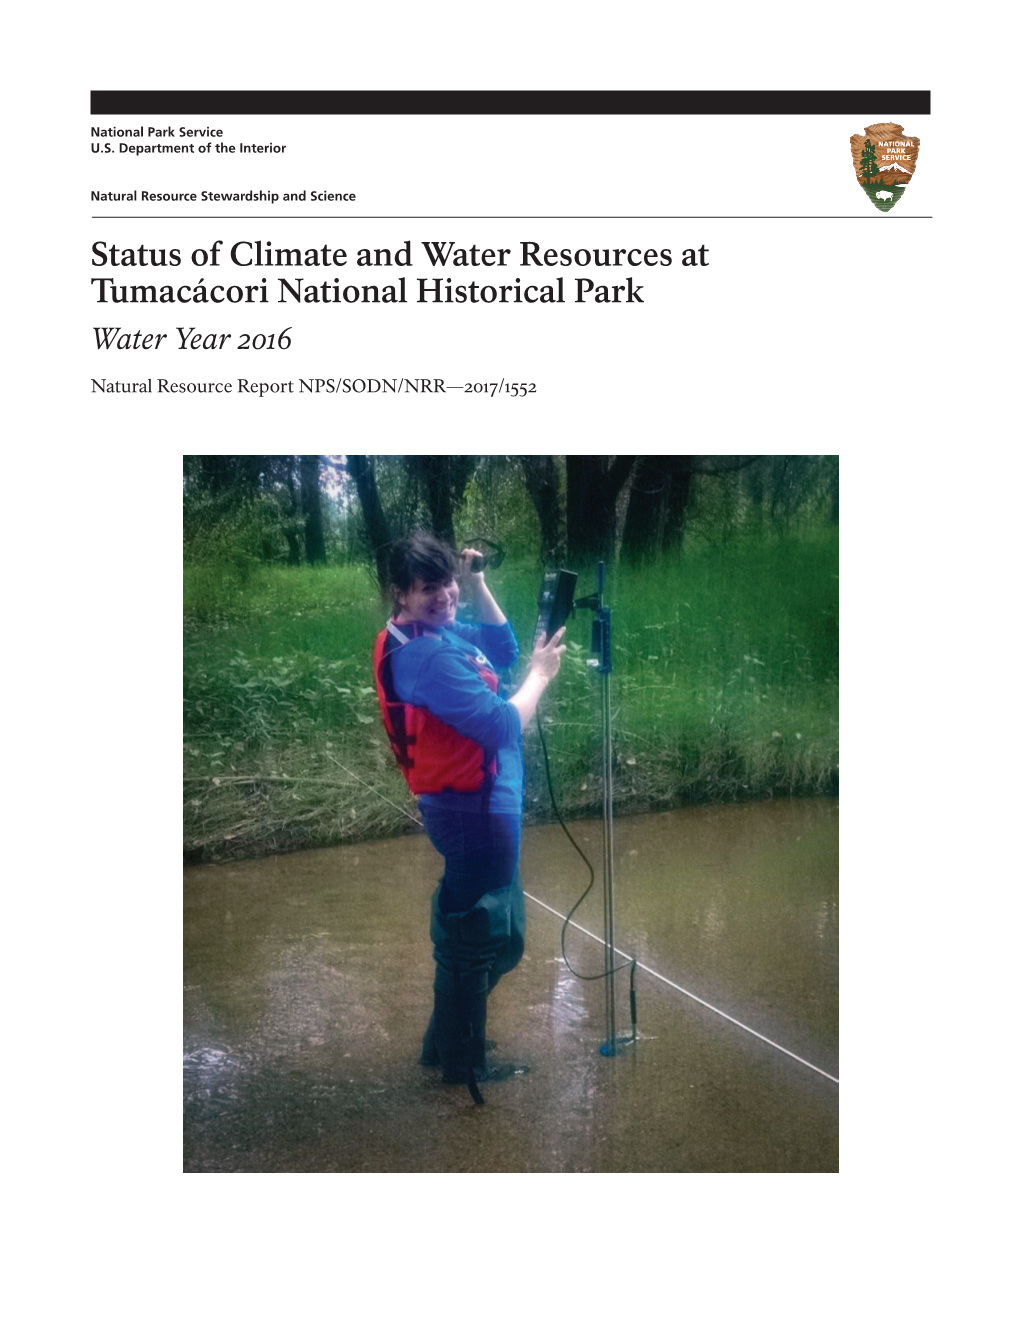 Status of Climate and Water Resources at Tumacácori National Historical Park Water Year 2016